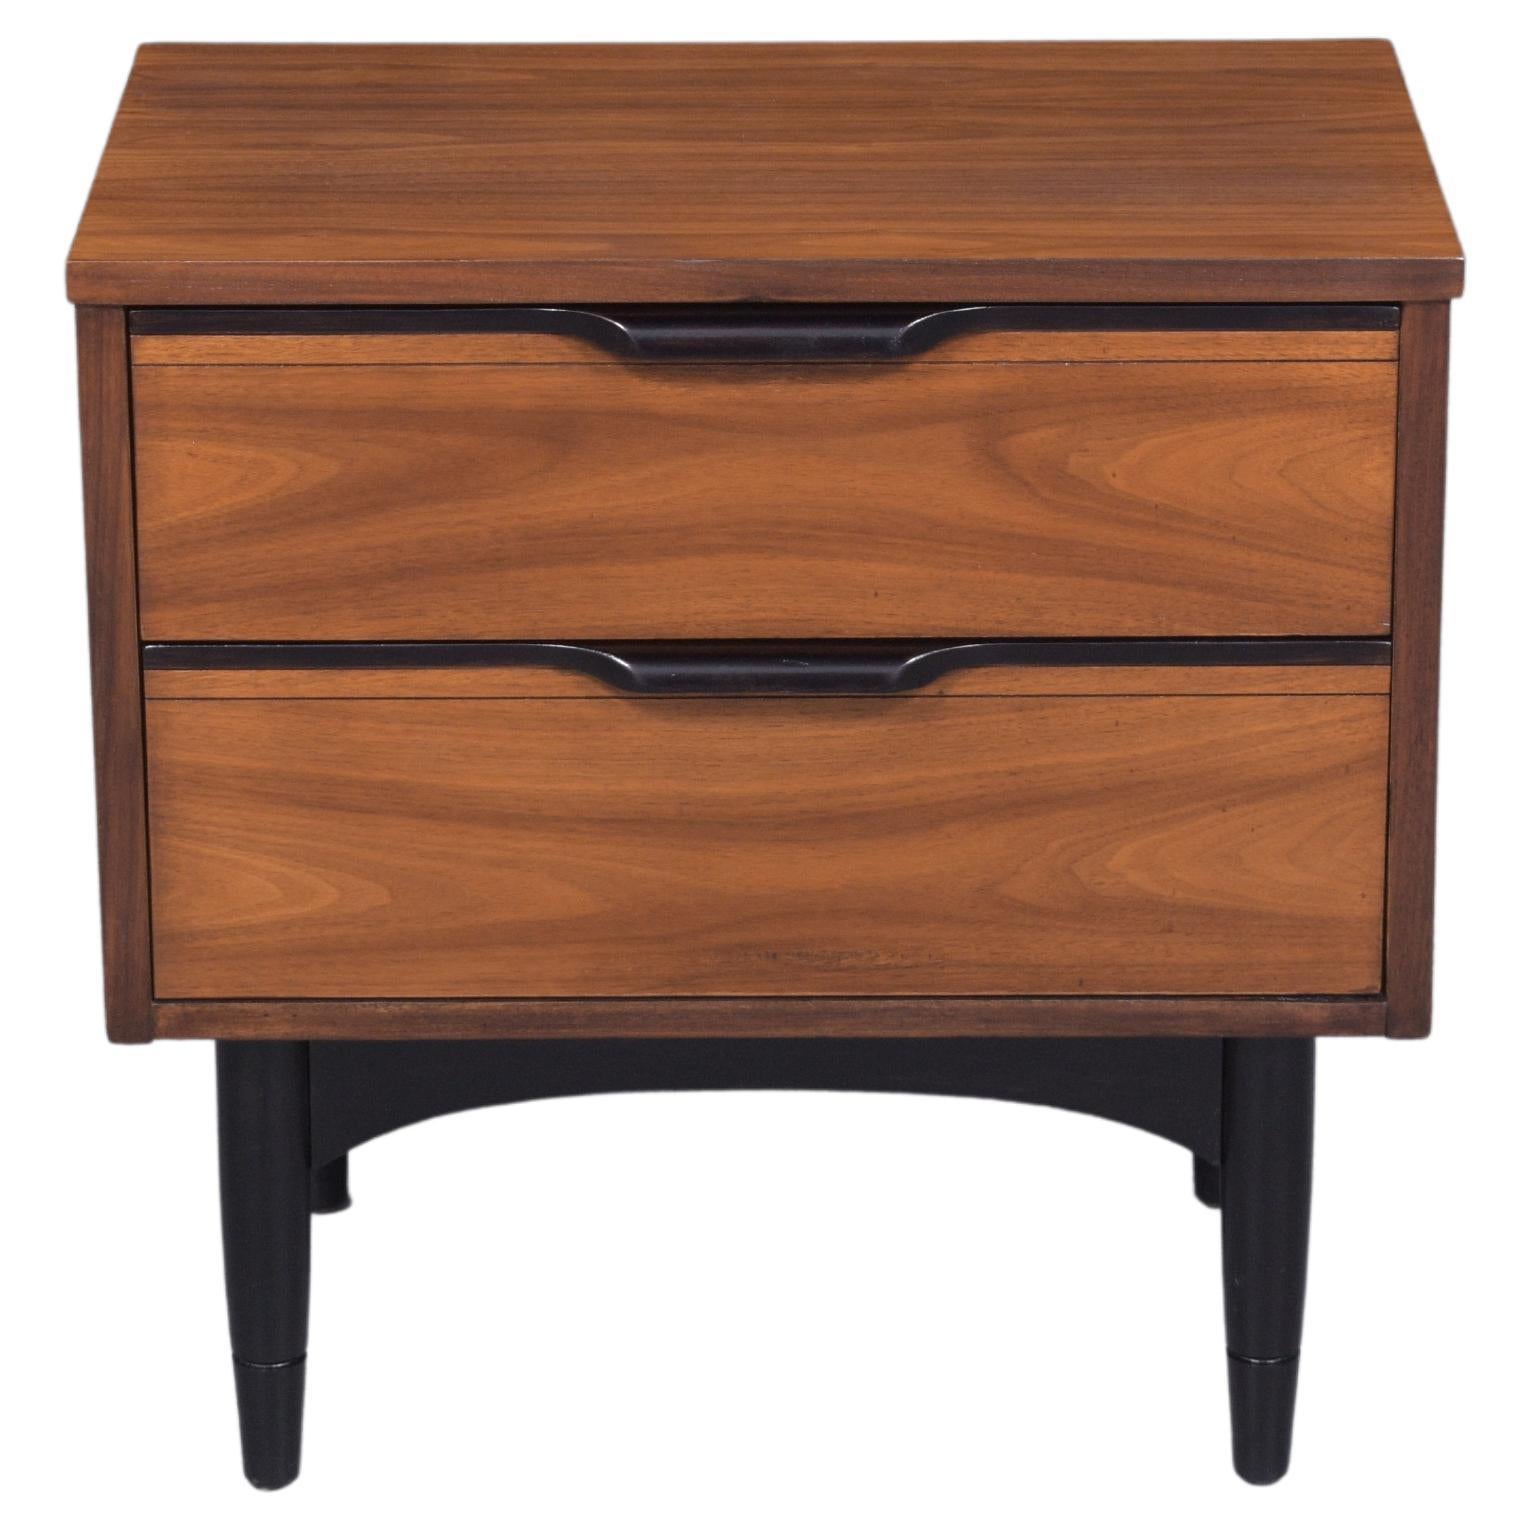 1960s Mid-Century Modern Walnut Nightstand: Ebonized Finish with Carved Details For Sale